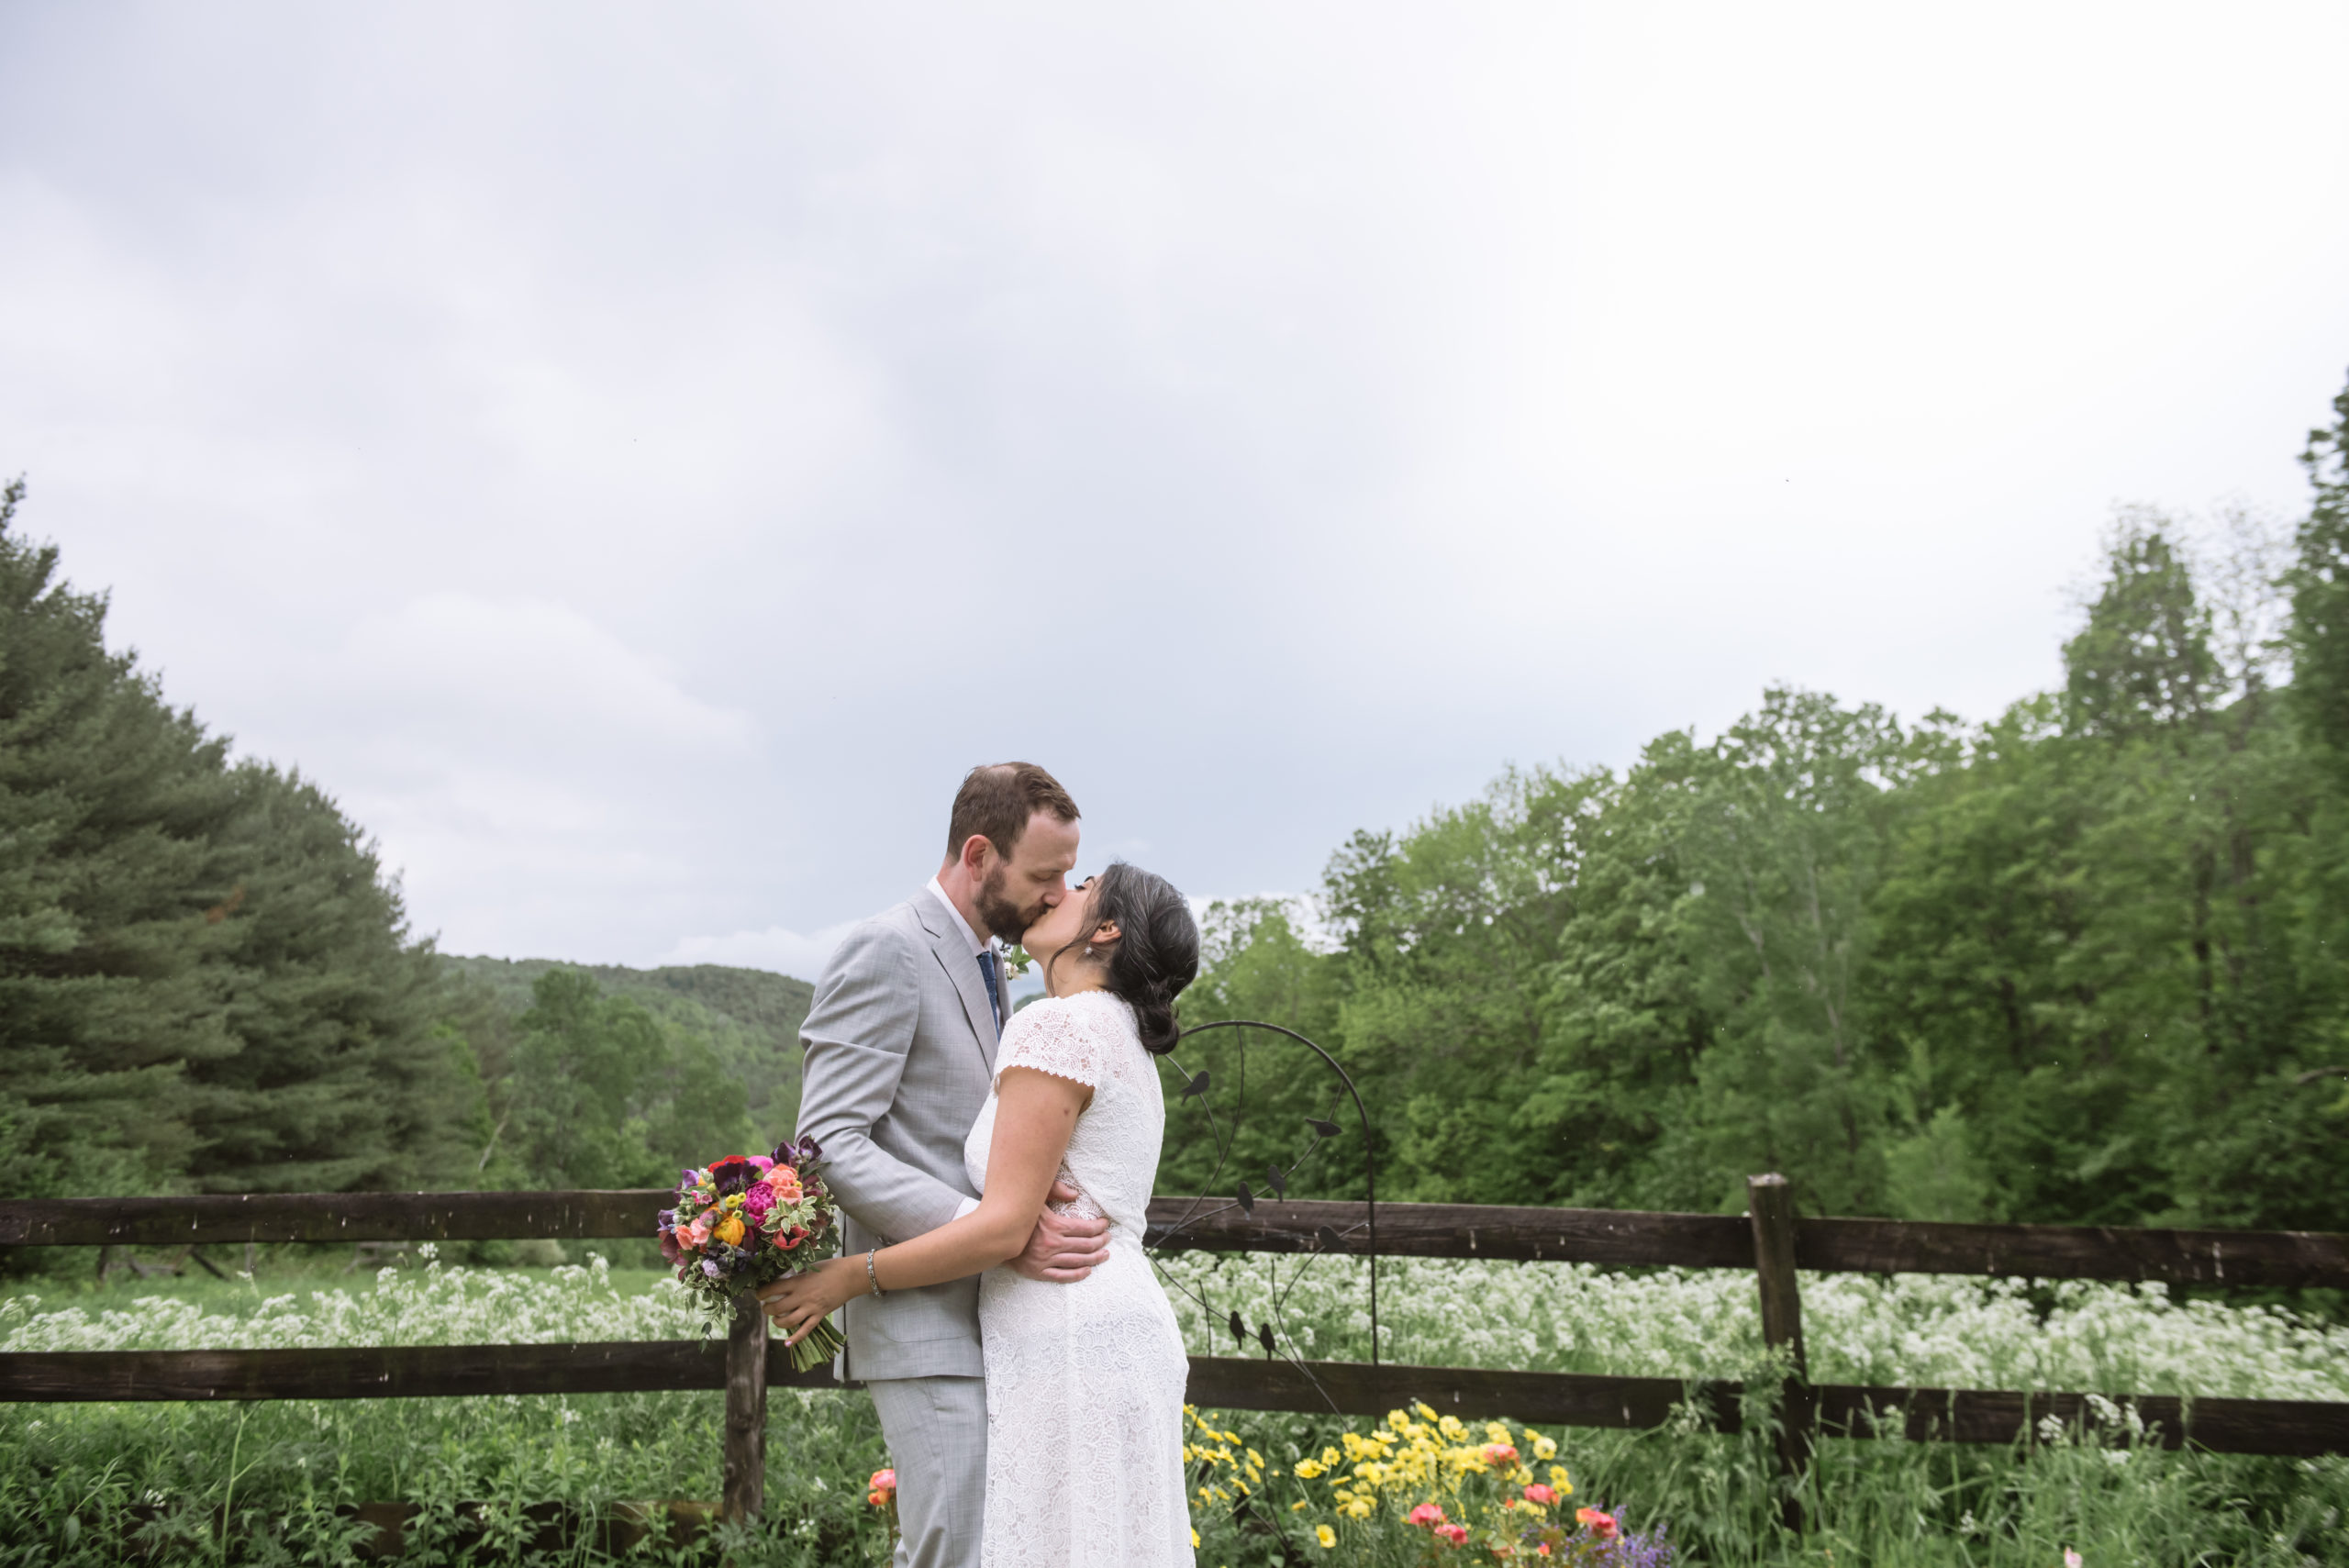 Bride and groom standing, embracing, facing one another. They are kissing one another and have their arms wrapped around each other. The bride is holding her bouquet in her left hand. They are standing in front of a dark wooden fence with lots of white wildflowers in the field. There are trees and mountains in the background.